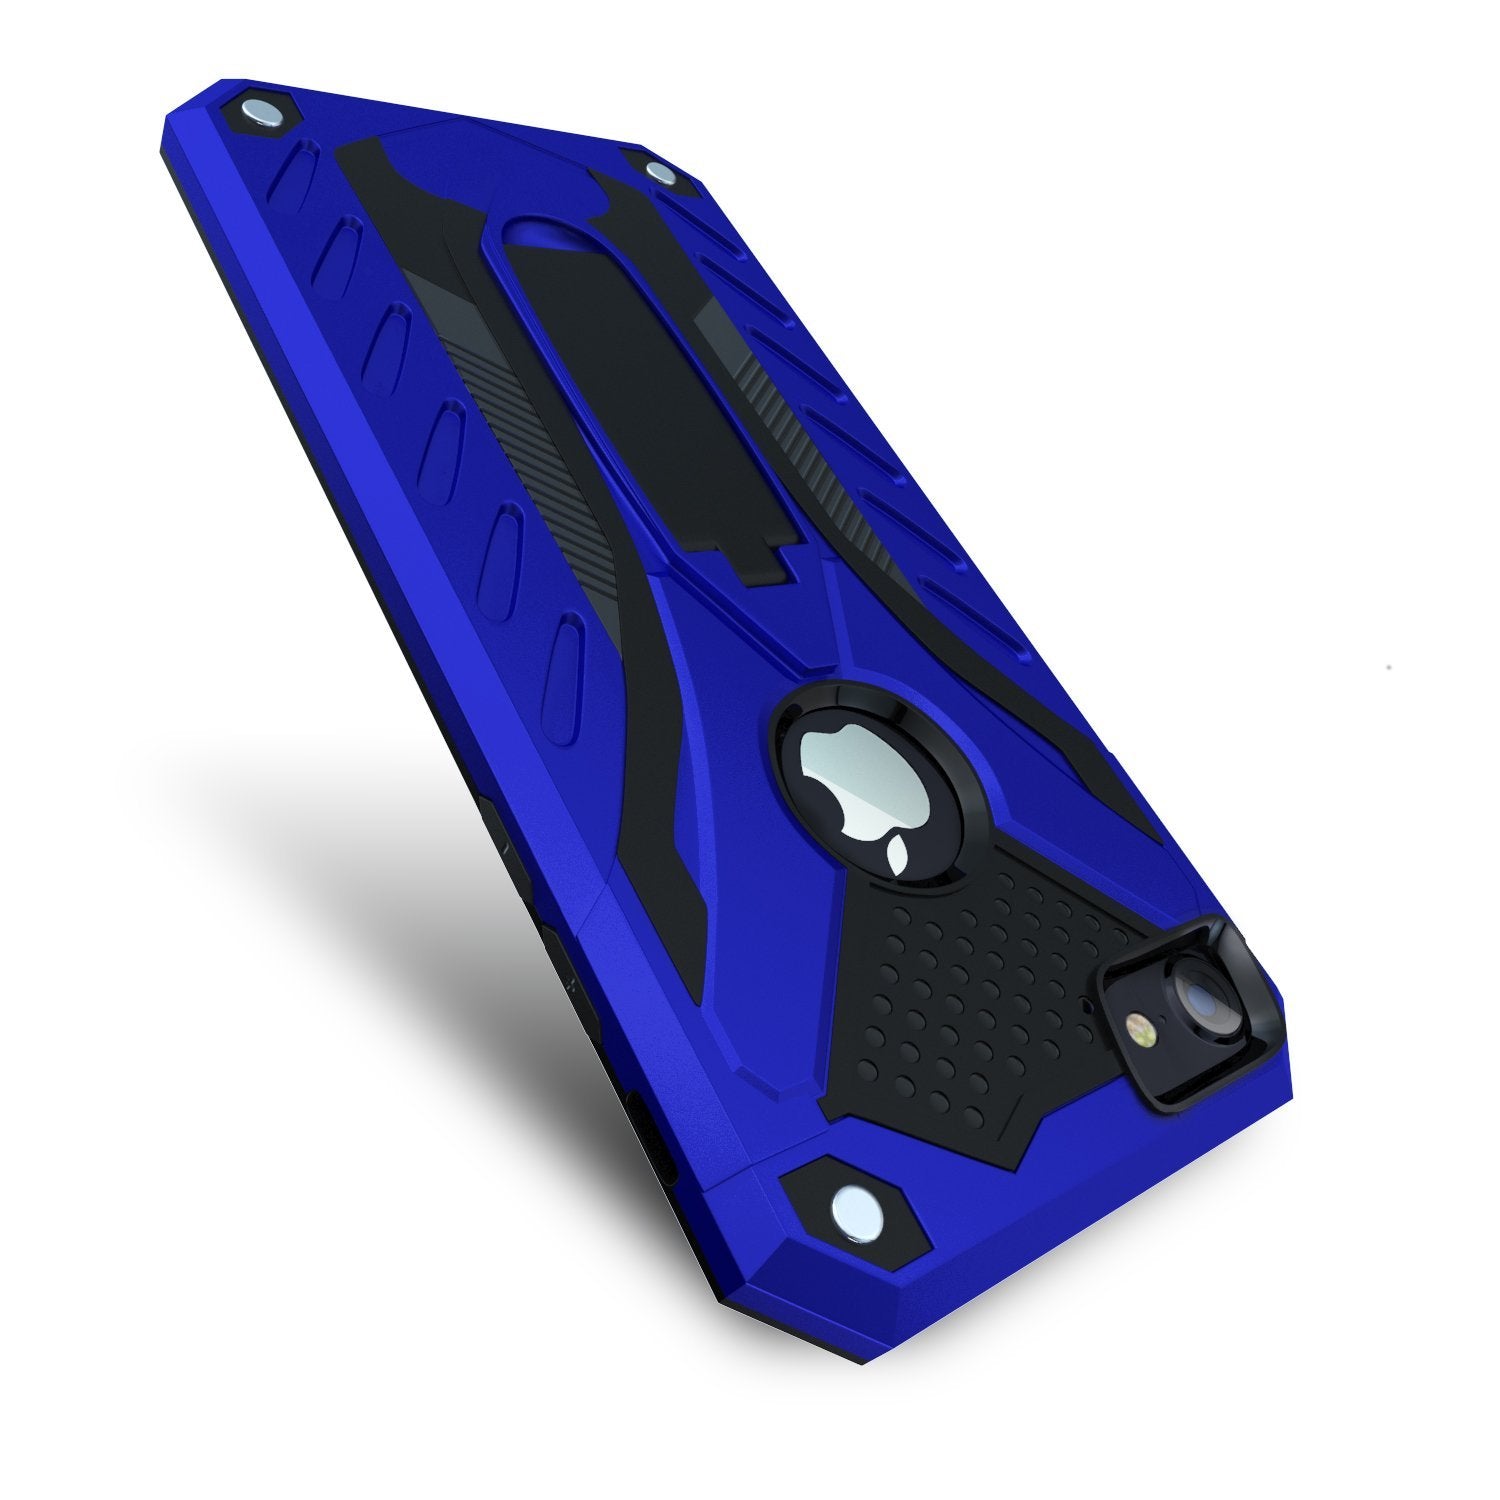 iPhone 7 / iPhone 8 Hard Case with Kickstand Blue